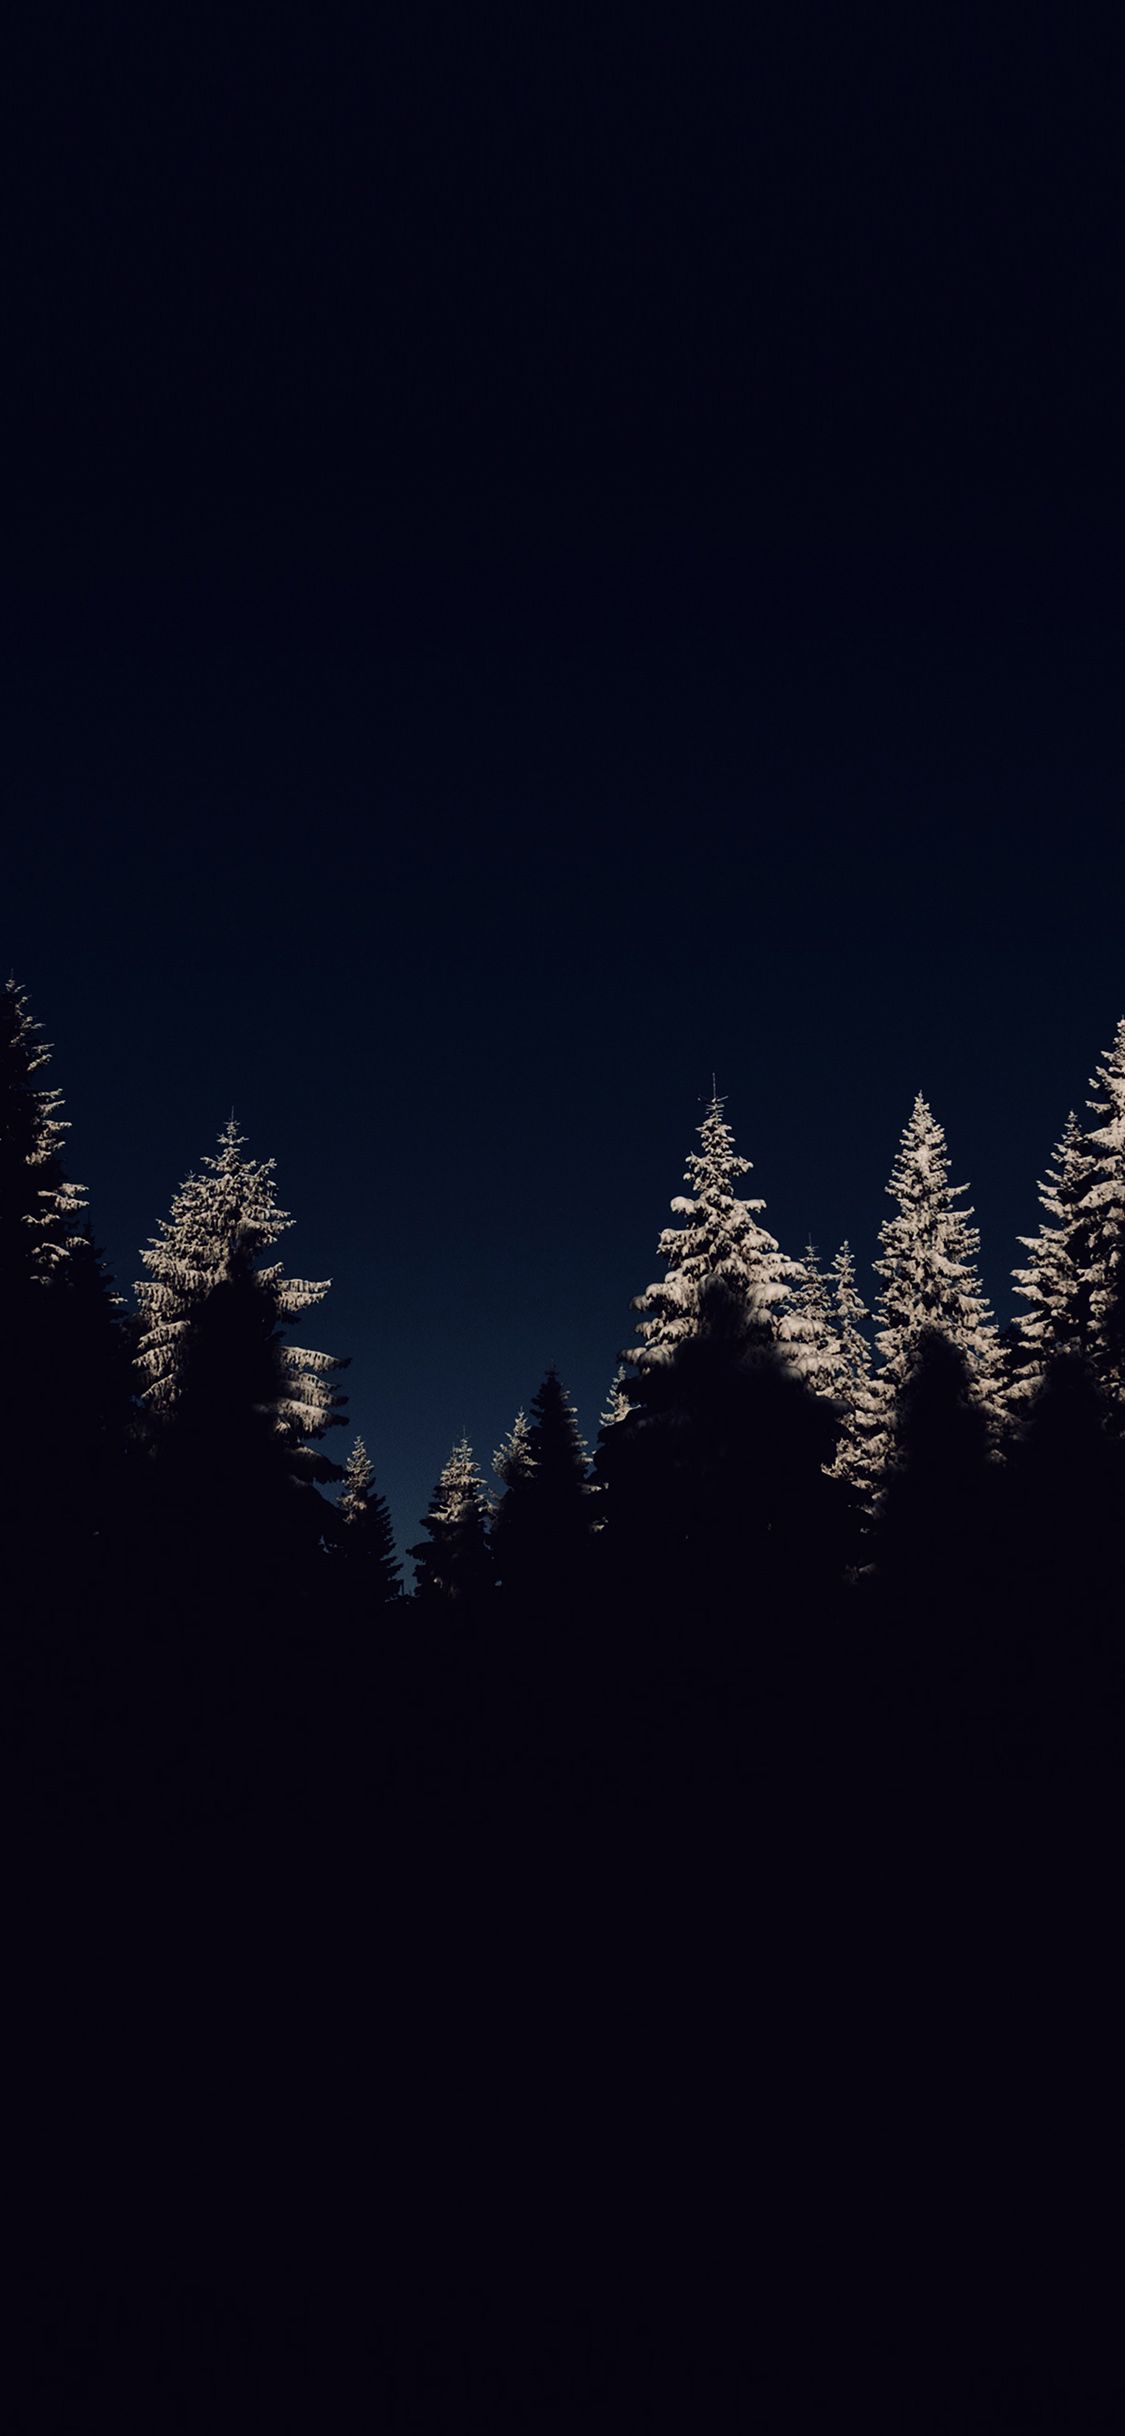 A snow covered forest against a dark blue sky - Woods